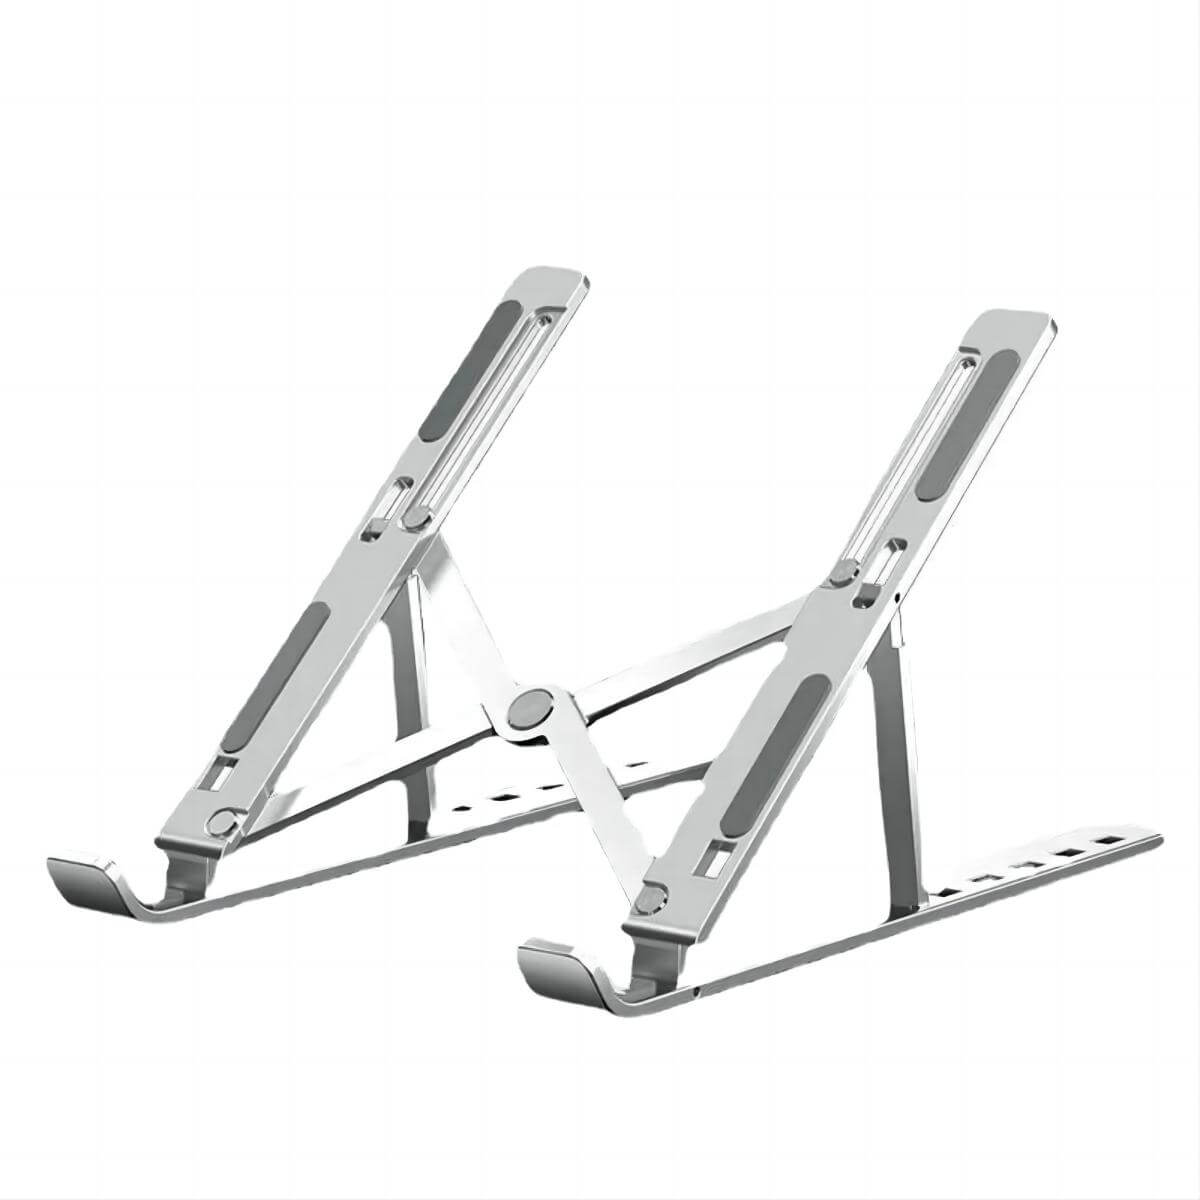 Z34 Portable Laptop Stand | Foldable Laptop Stand | Hugmie